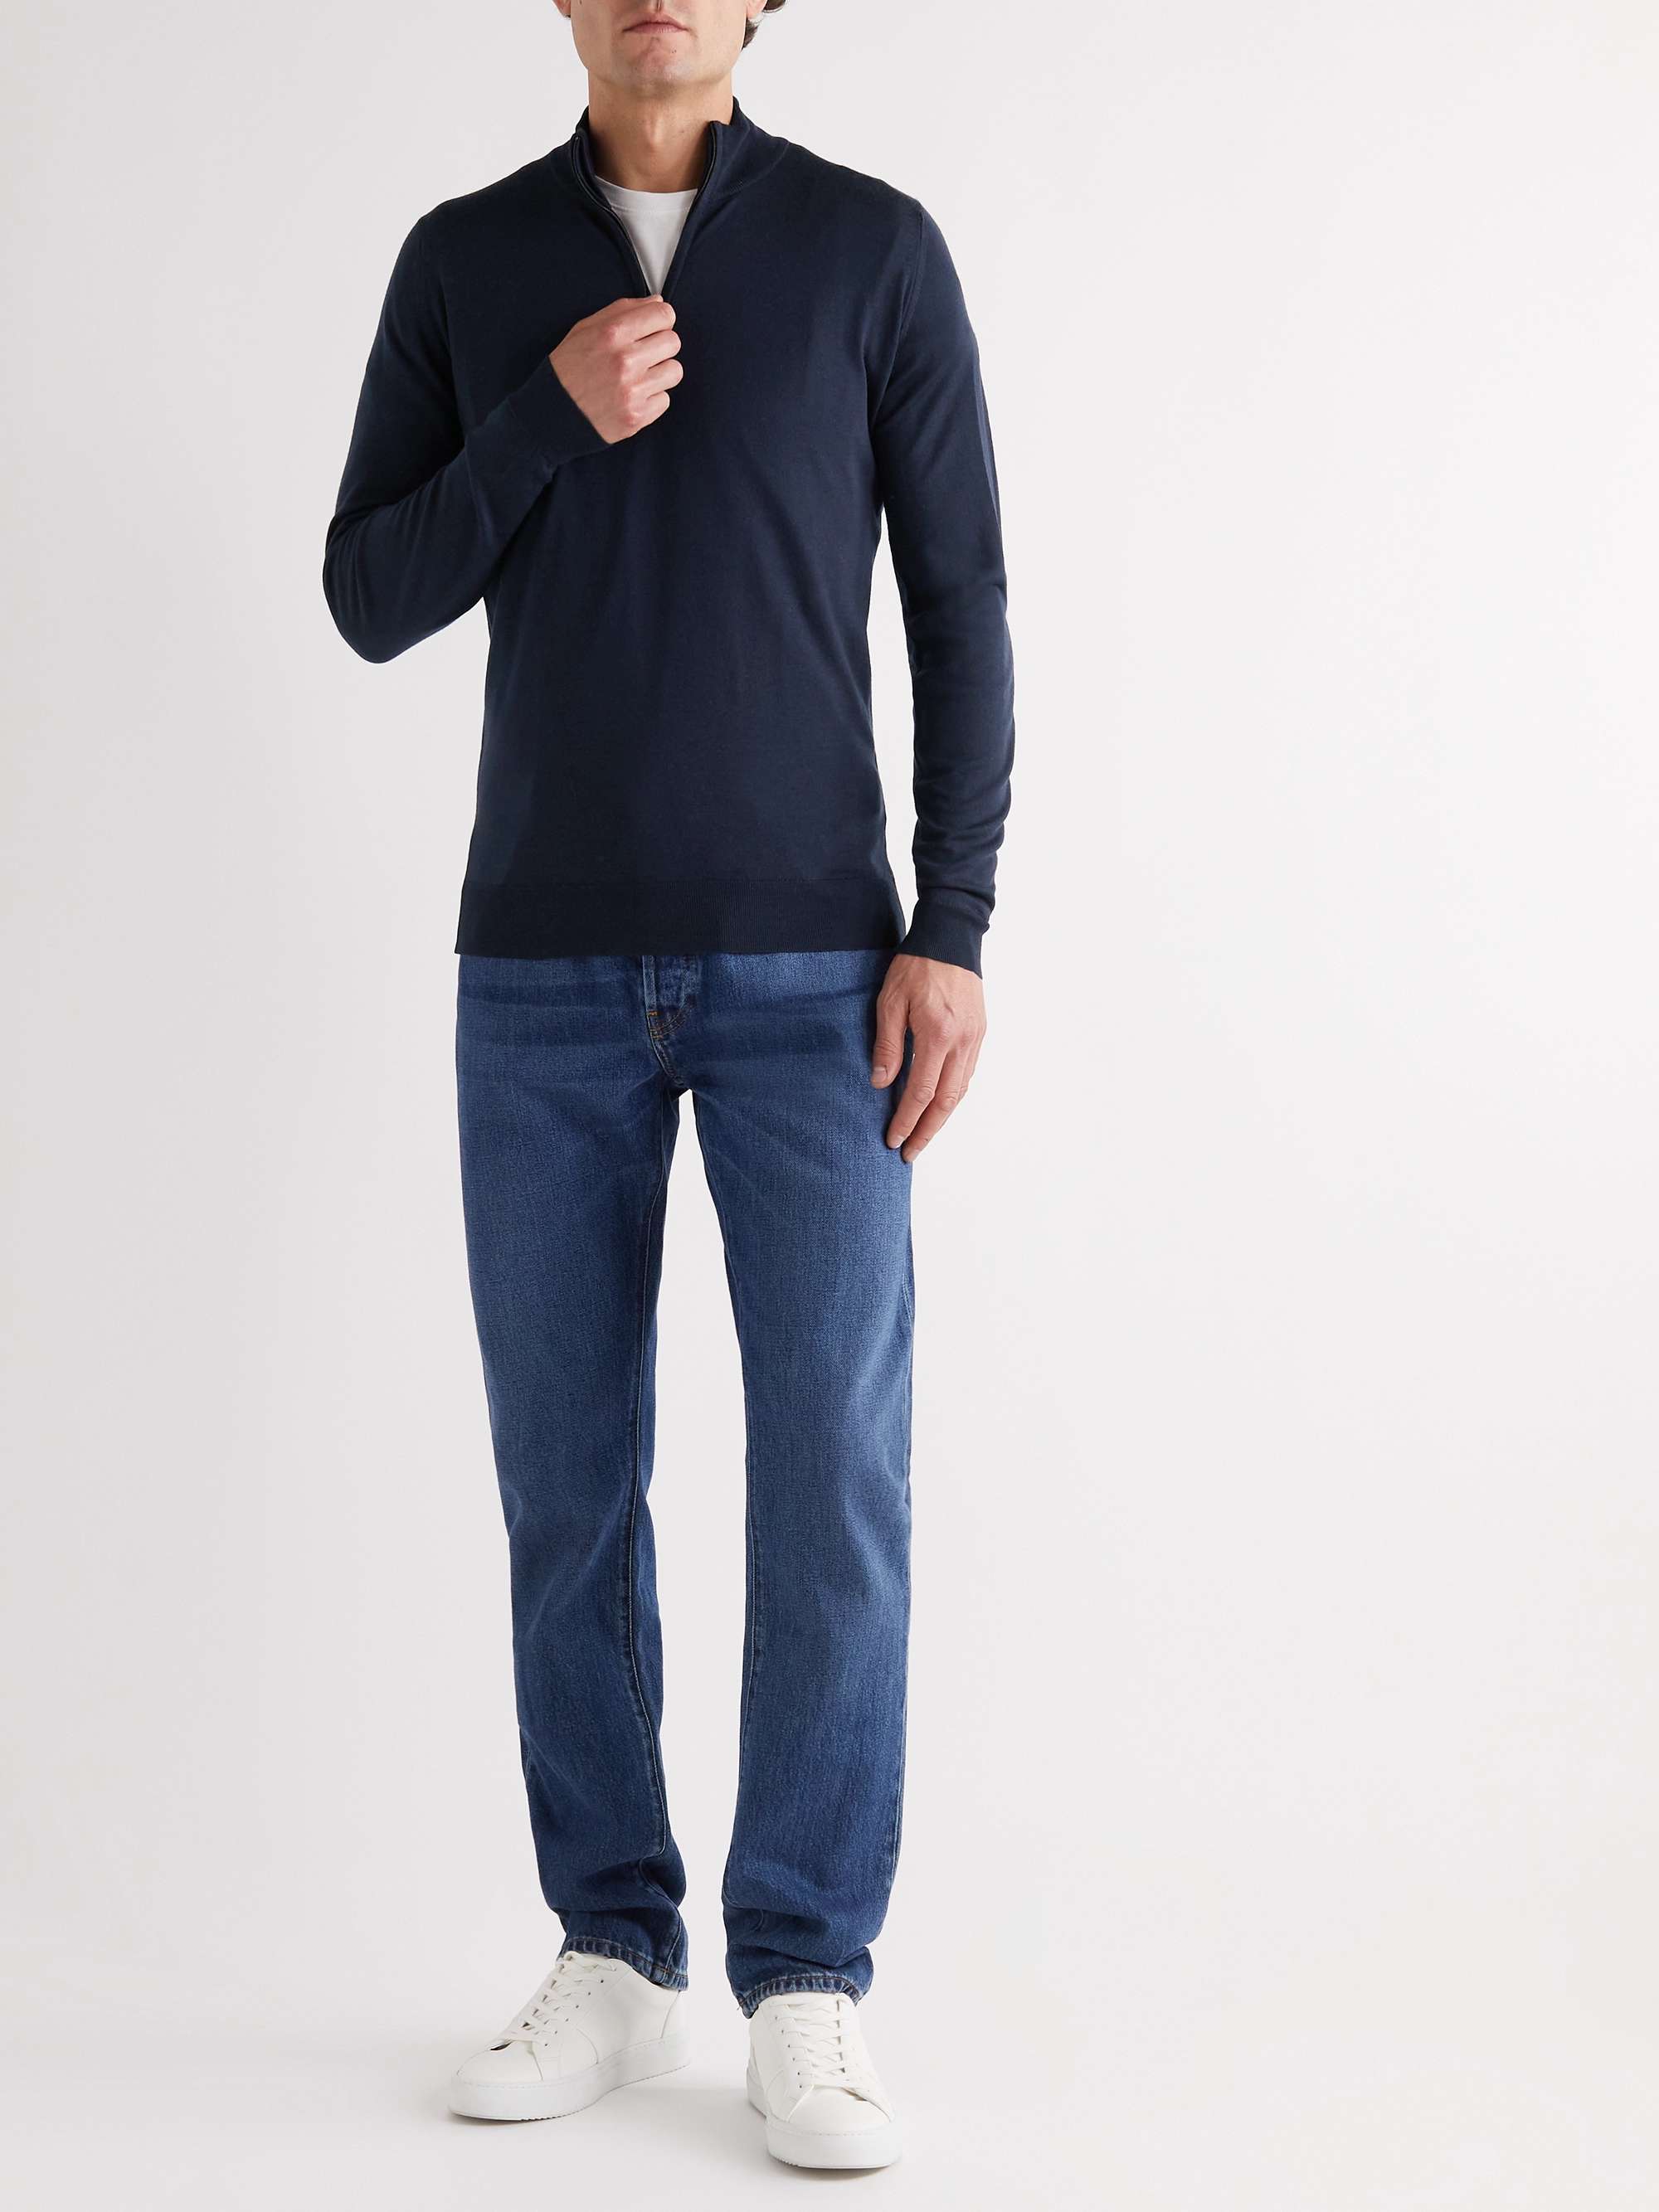 John Smedley Half-zip Wool Jumper in Blue for Men Mens Clothing Sweaters and knitwear Zipped sweaters 